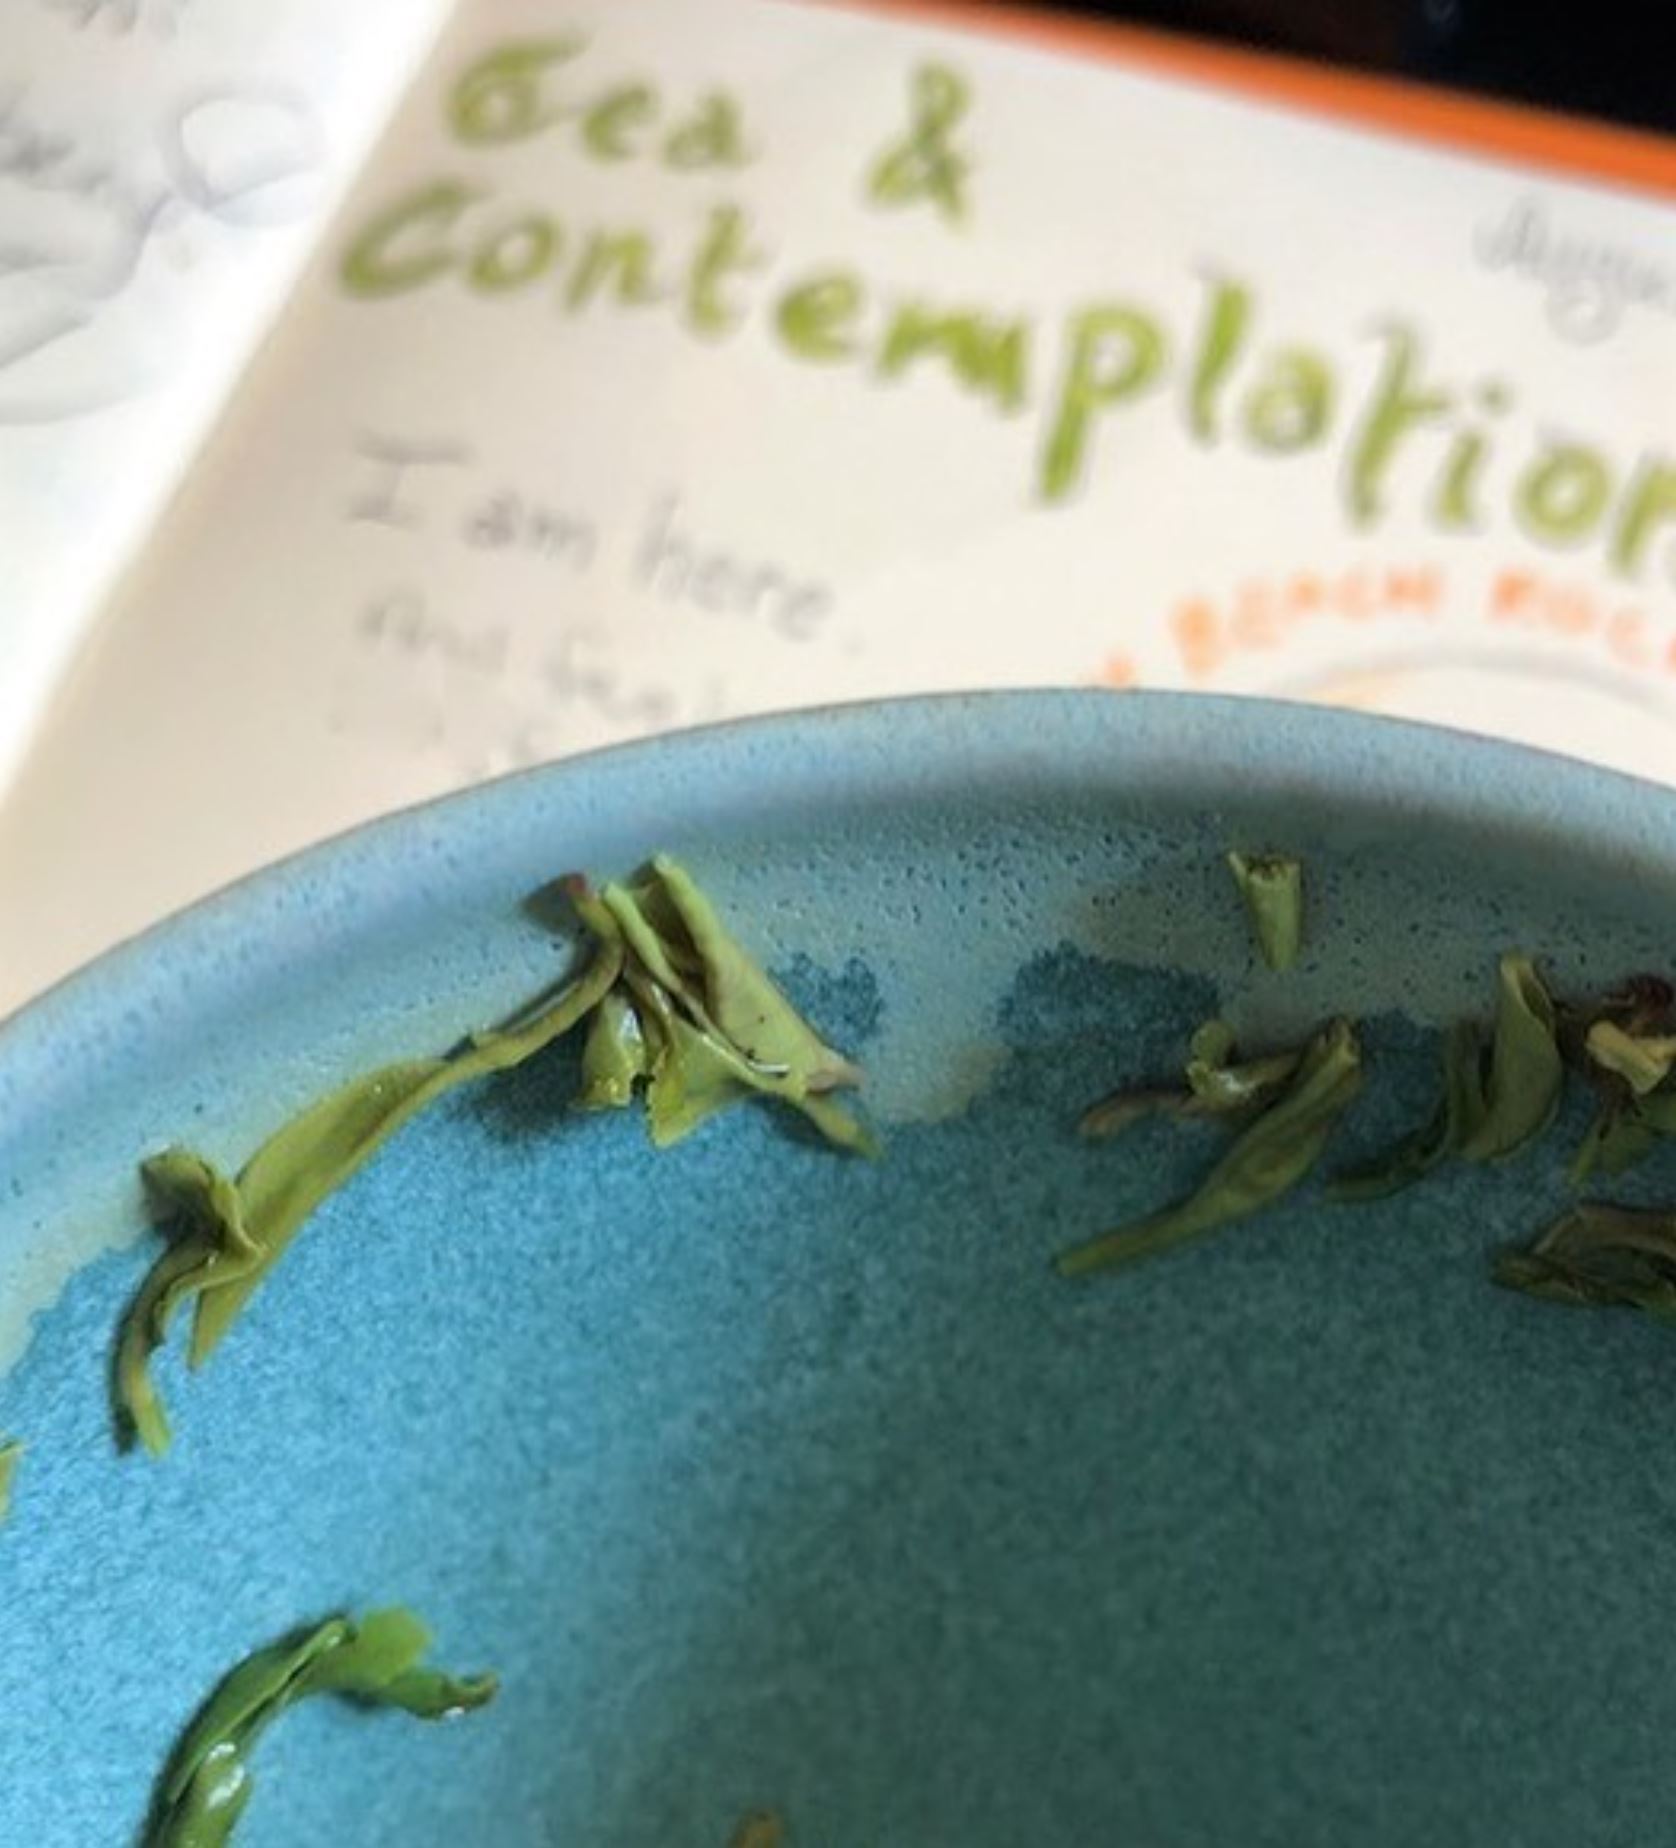 Blue tea bowl with green tea leaves along the ridge. Journal page that says "Tea & Contemplation" in the background.